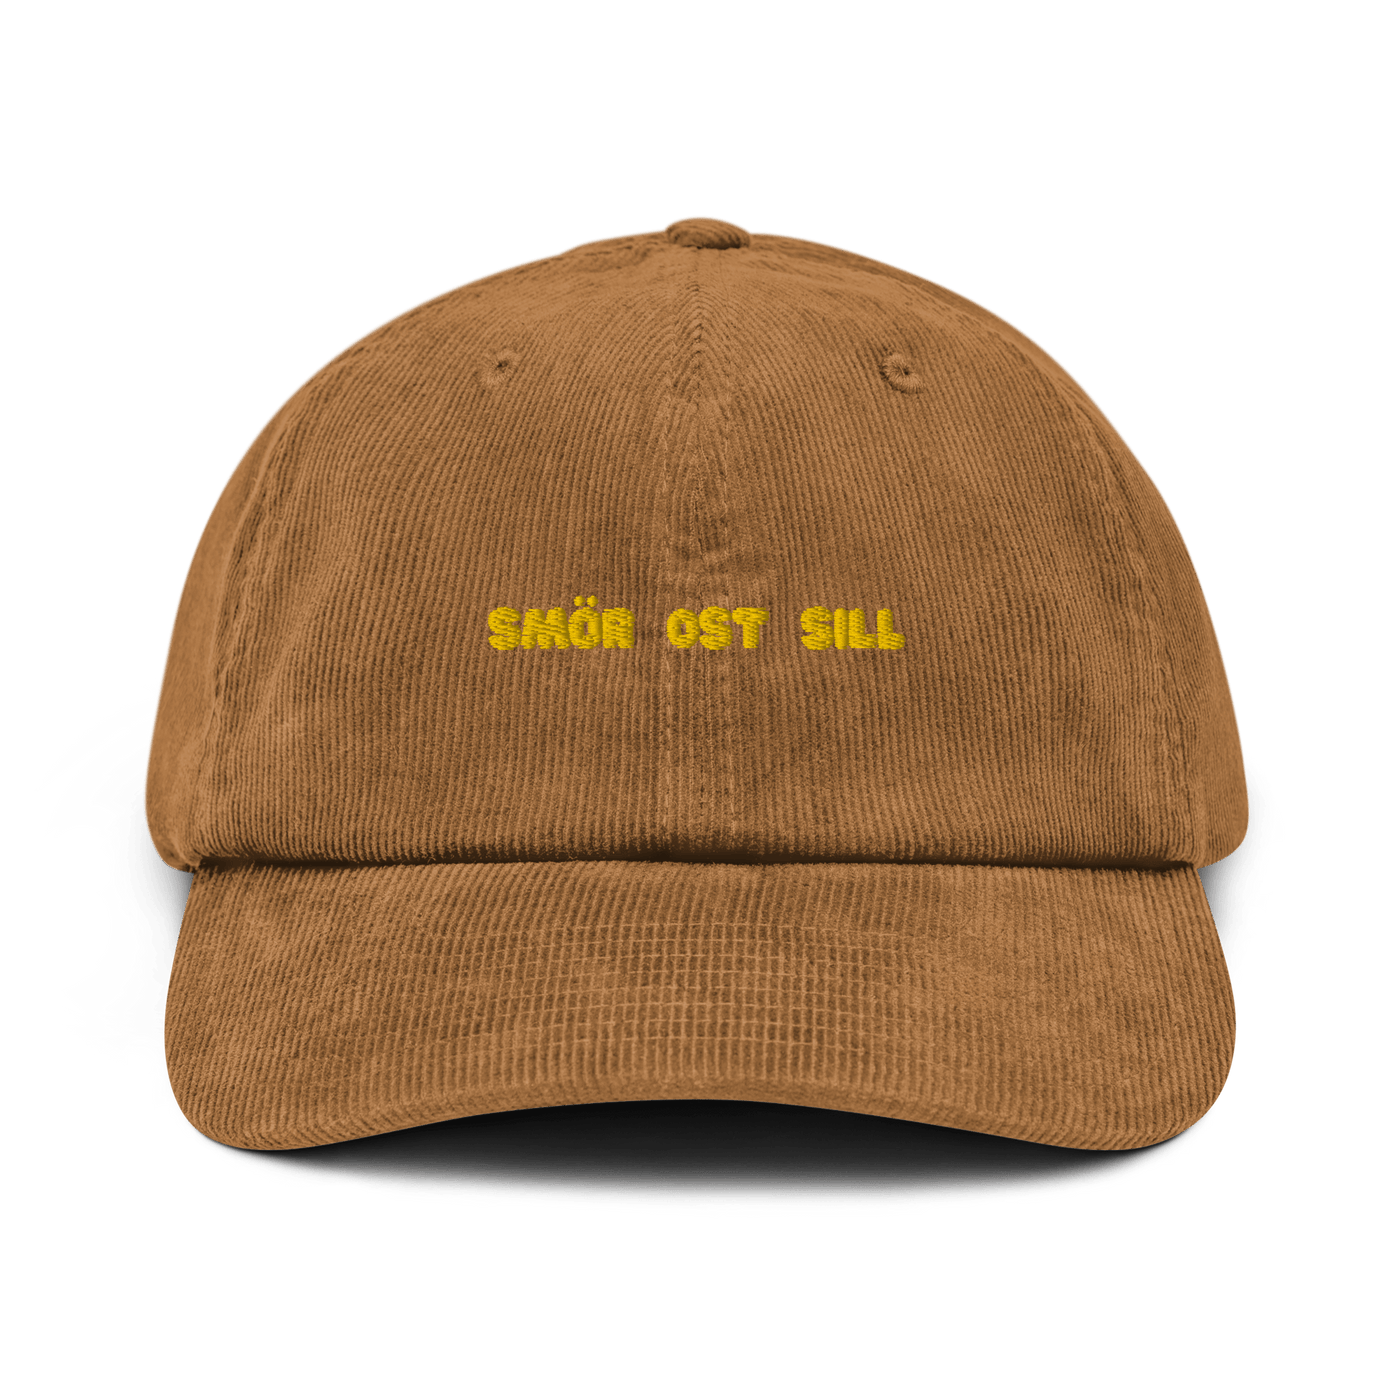 SOS Corduroy hat - Camel - Just Another Cap Store